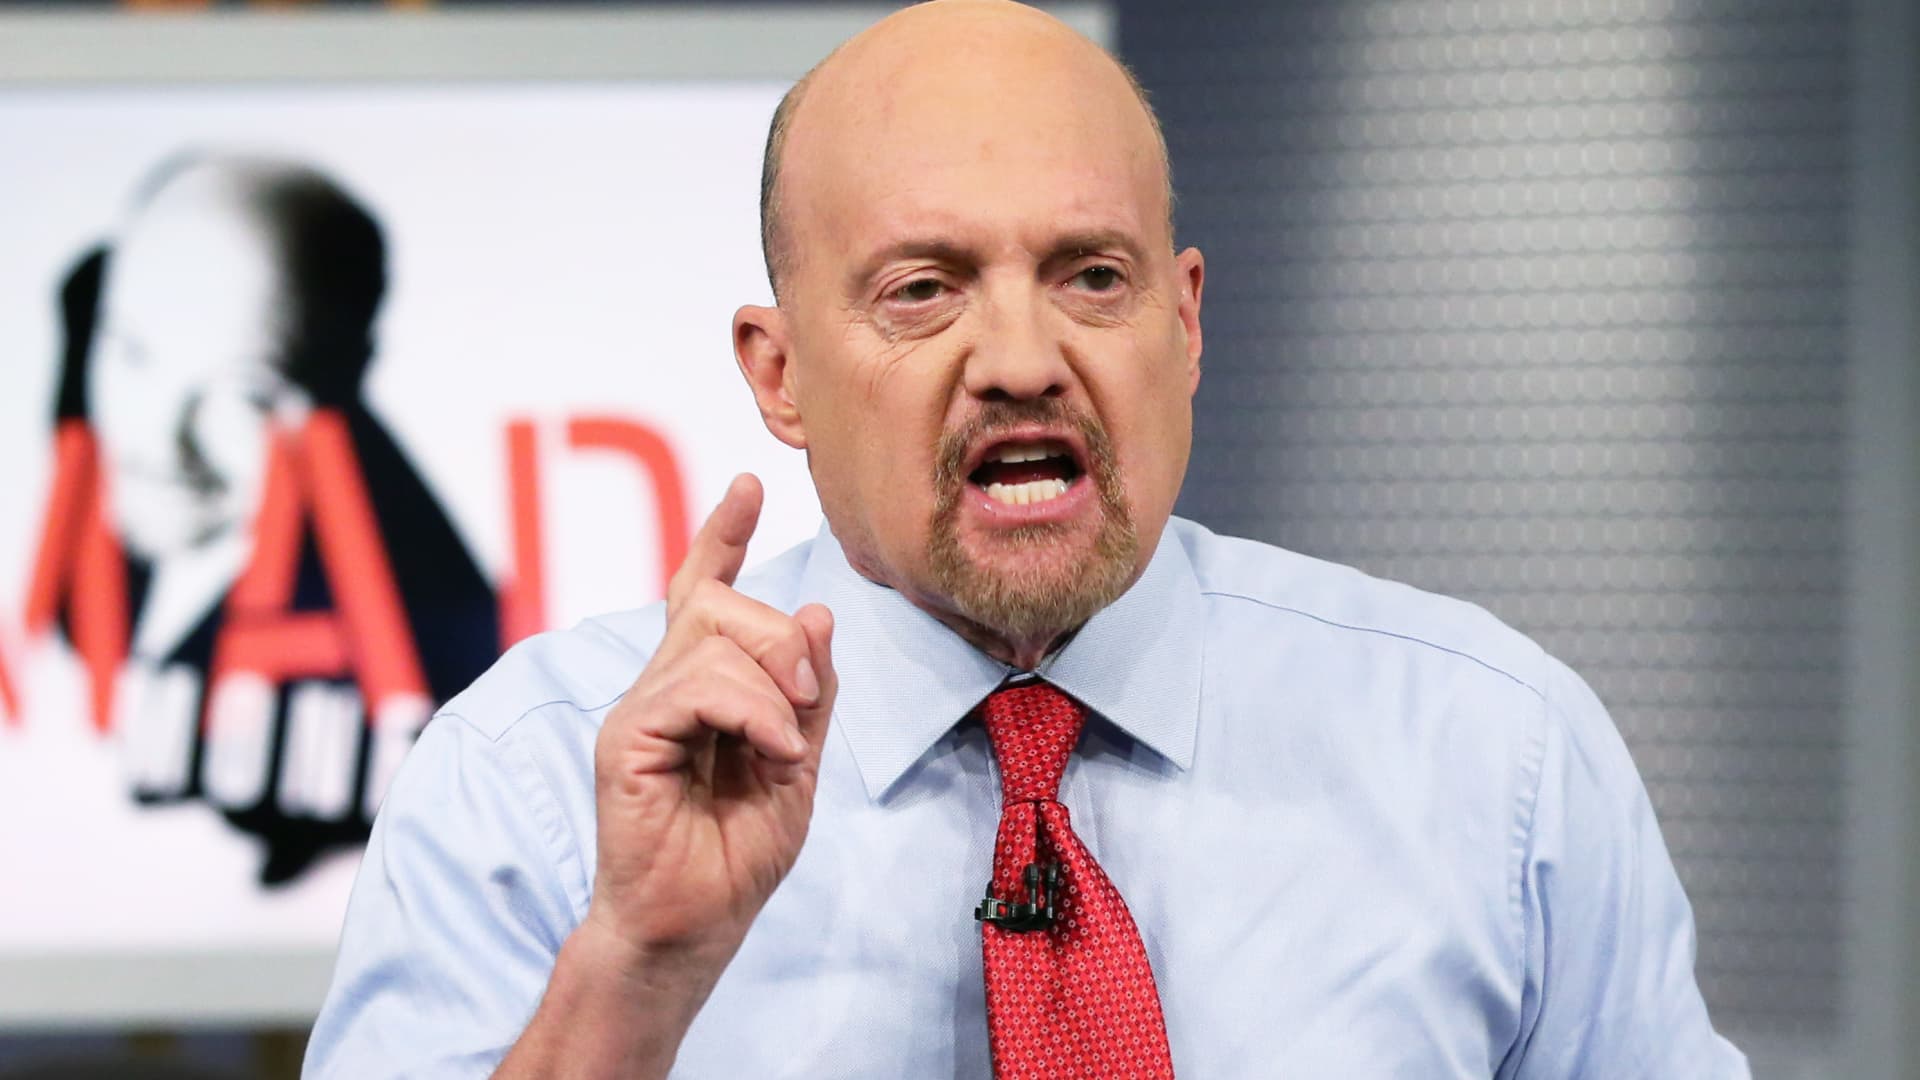 Jim Cramer says recent sellers of mega-cap tech stocks missed out